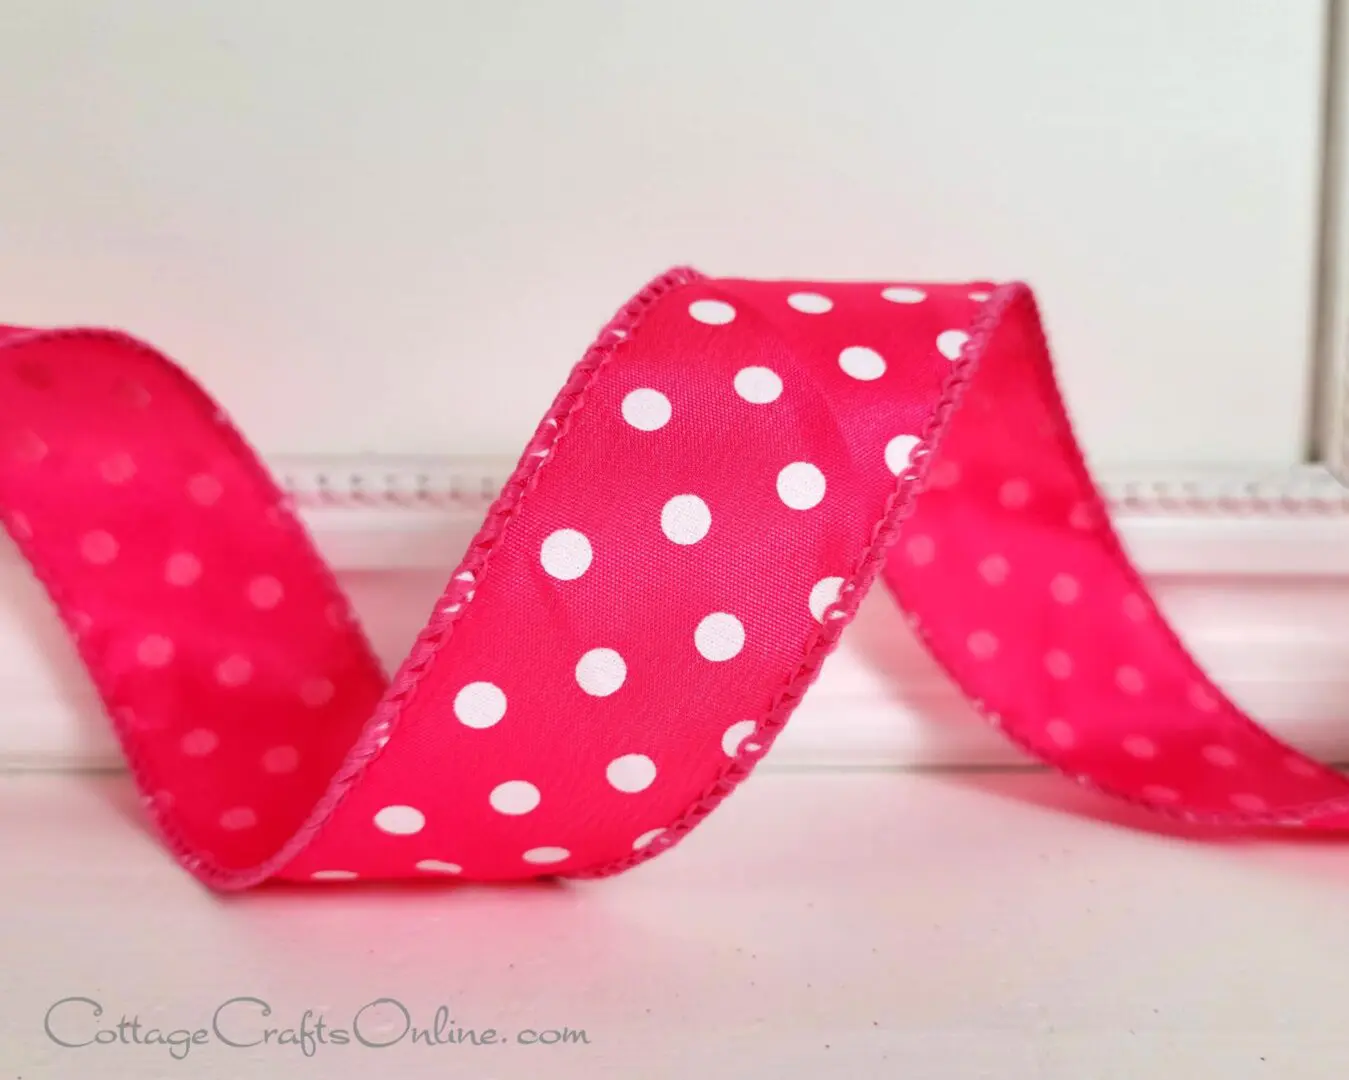 A red ribbon with white polka dots on it.